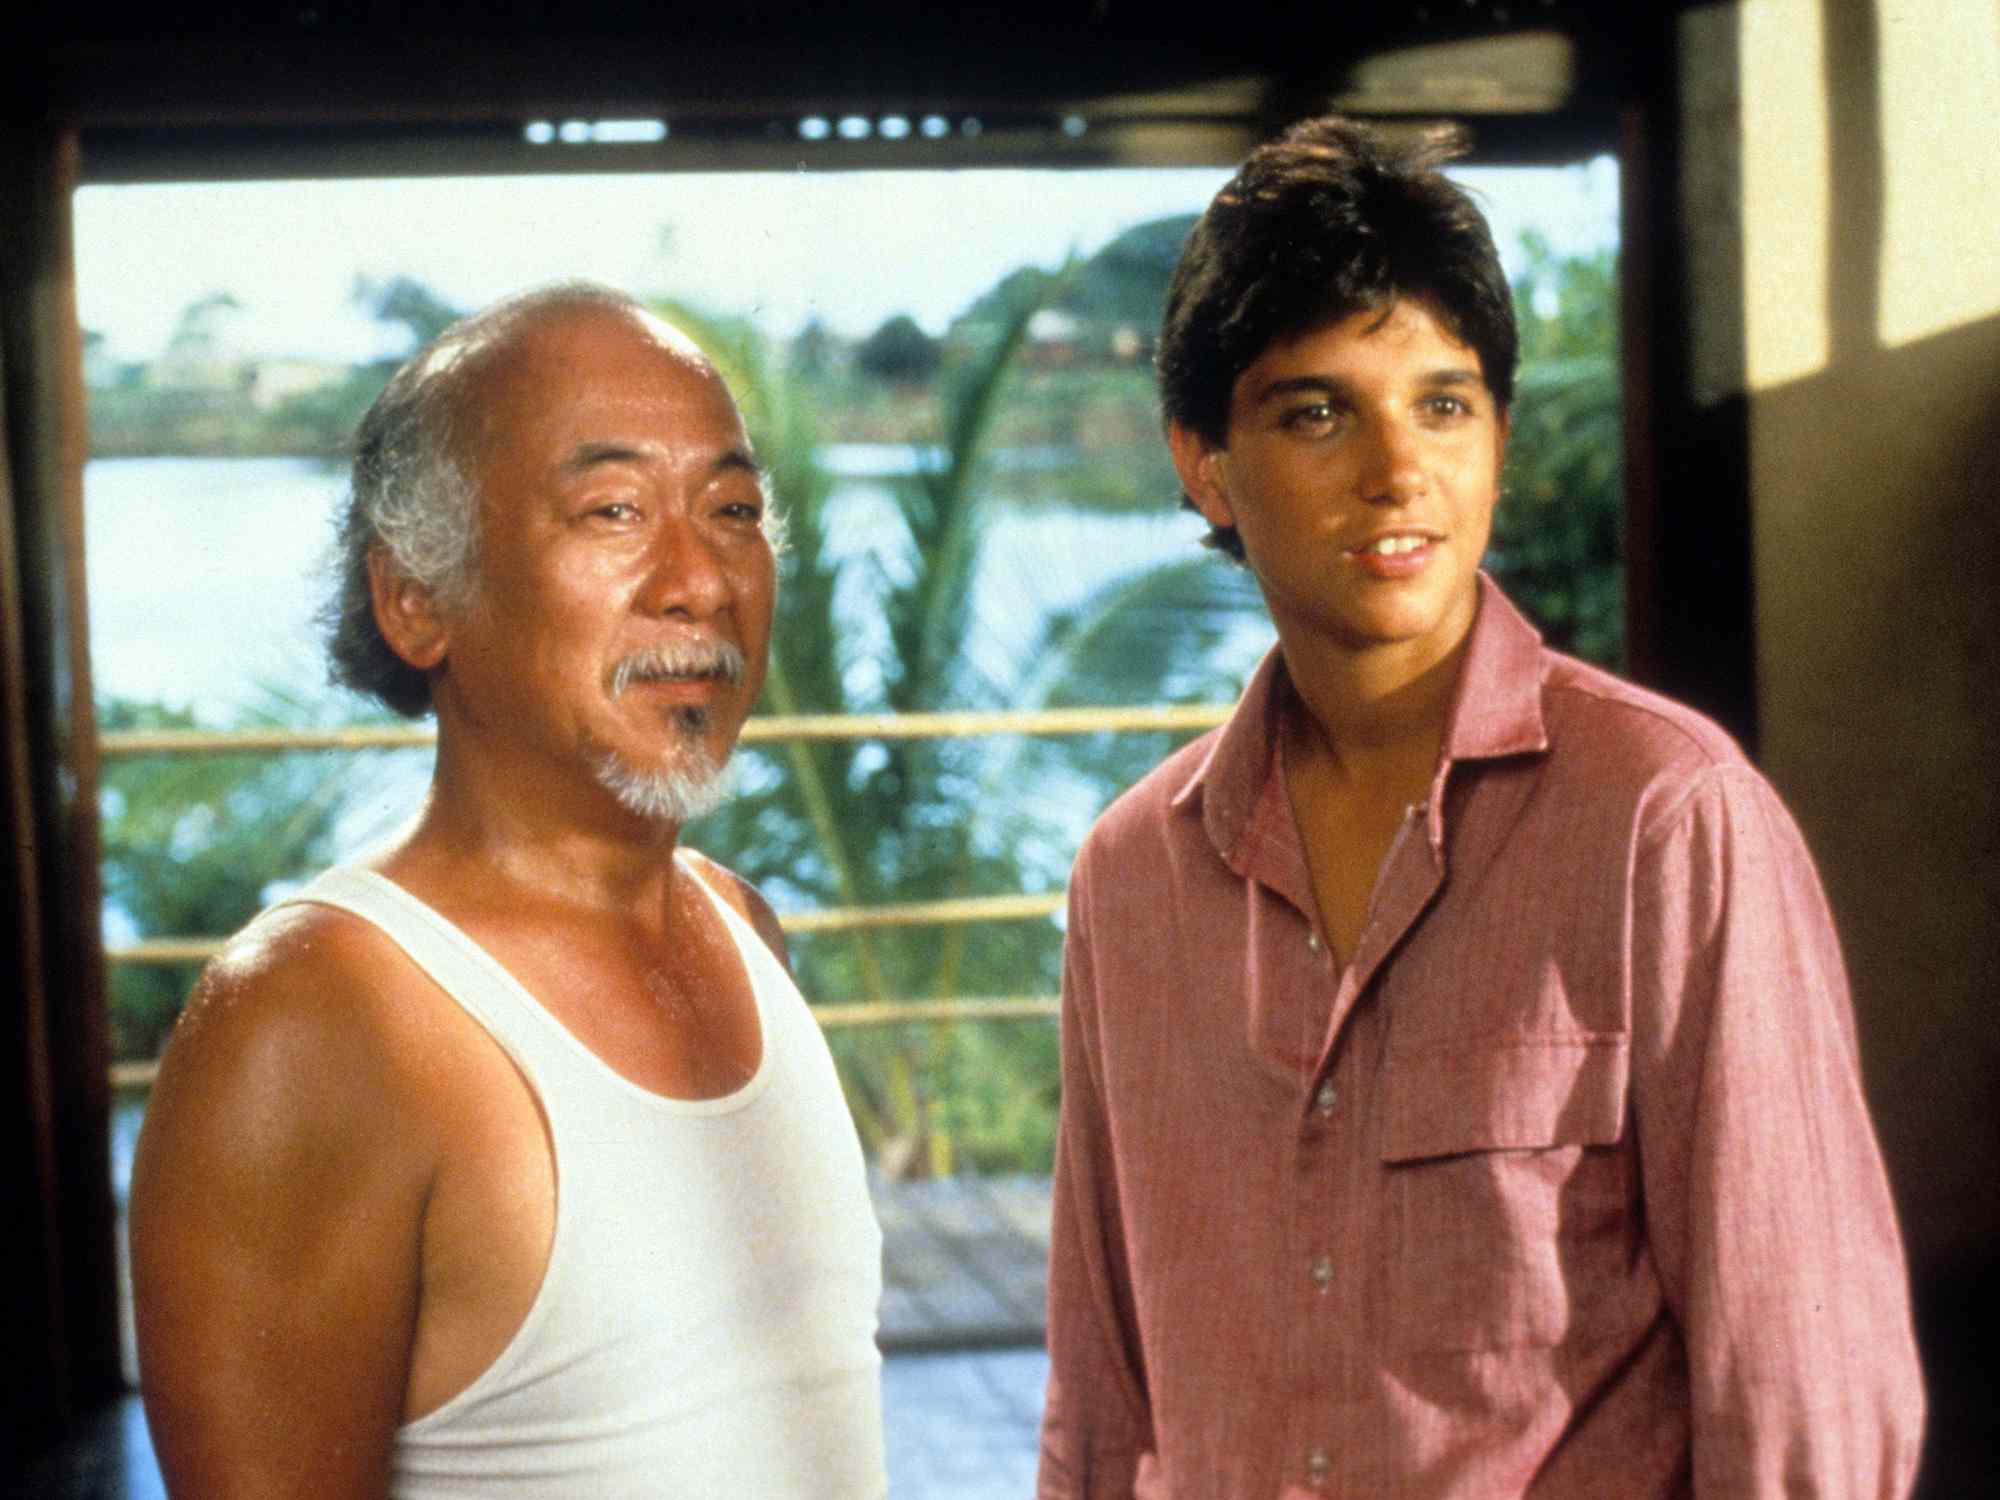 The Cast of “The Karate Kid”: Where Are They Now?